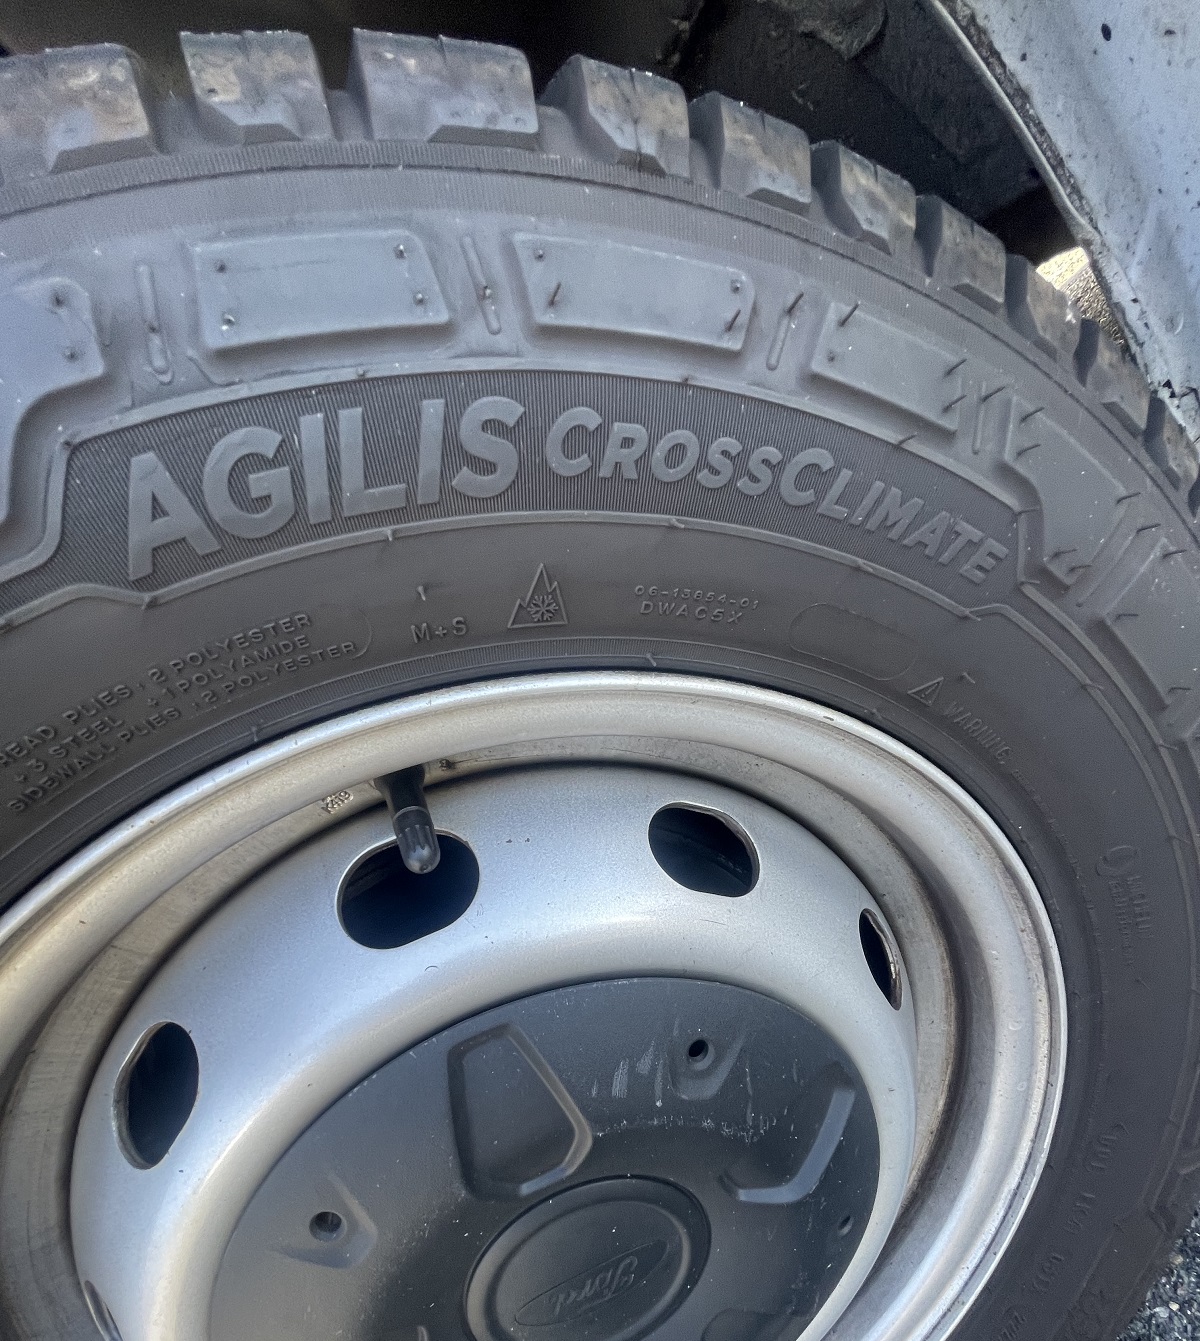 Image of Michelin CrossClimate tire courtesy of Jay Condrick